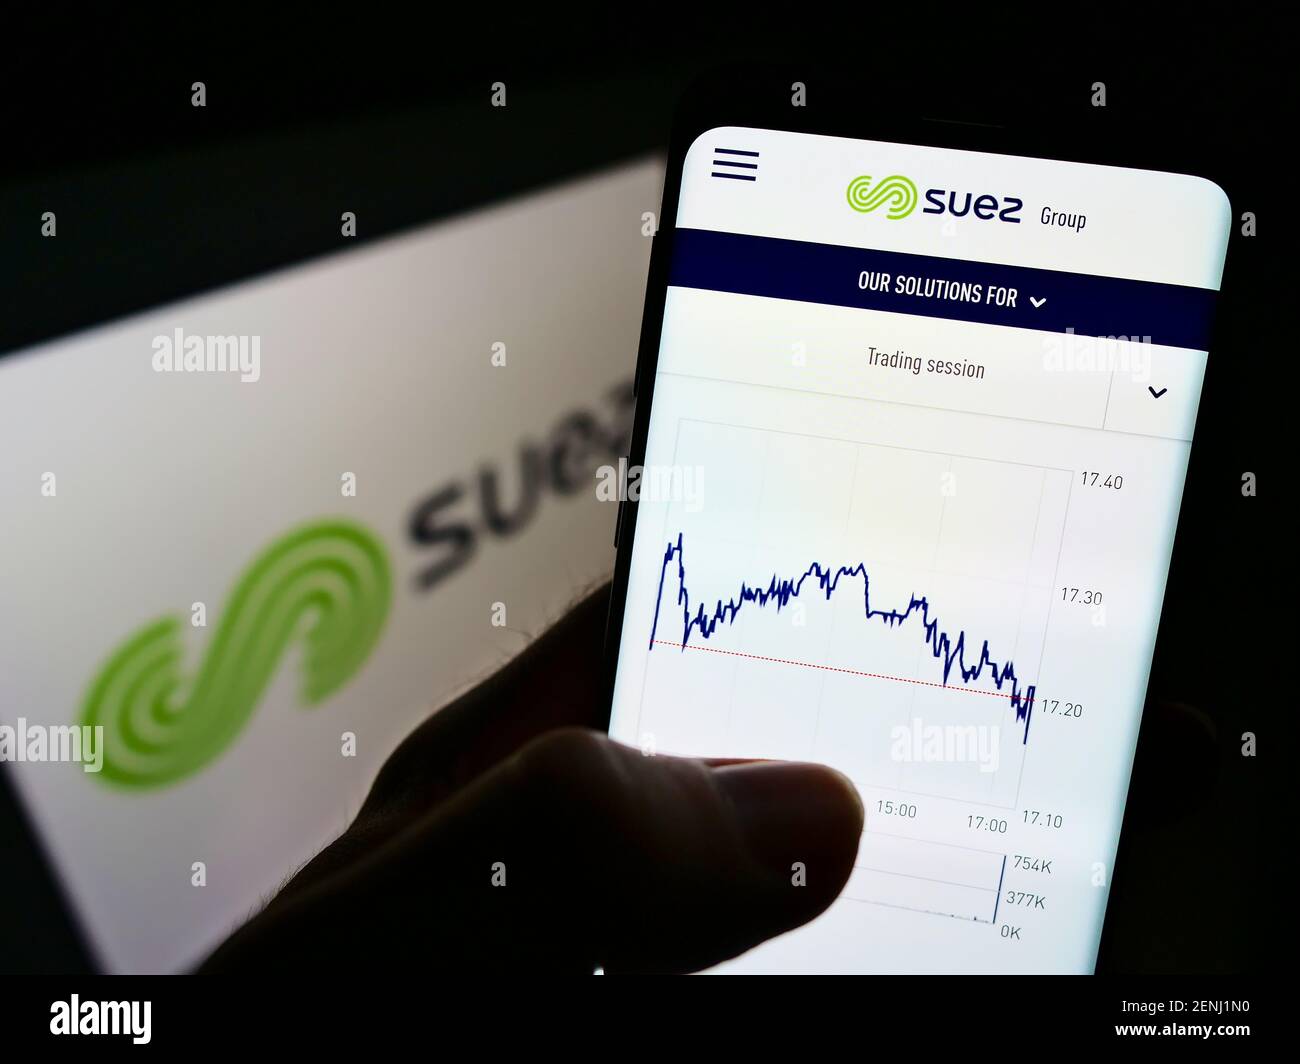 Person holding cellphone with website and chart of French utility company Suez S.A. on screen in front of logo. Focus on top-center of phone display. Stock Photo